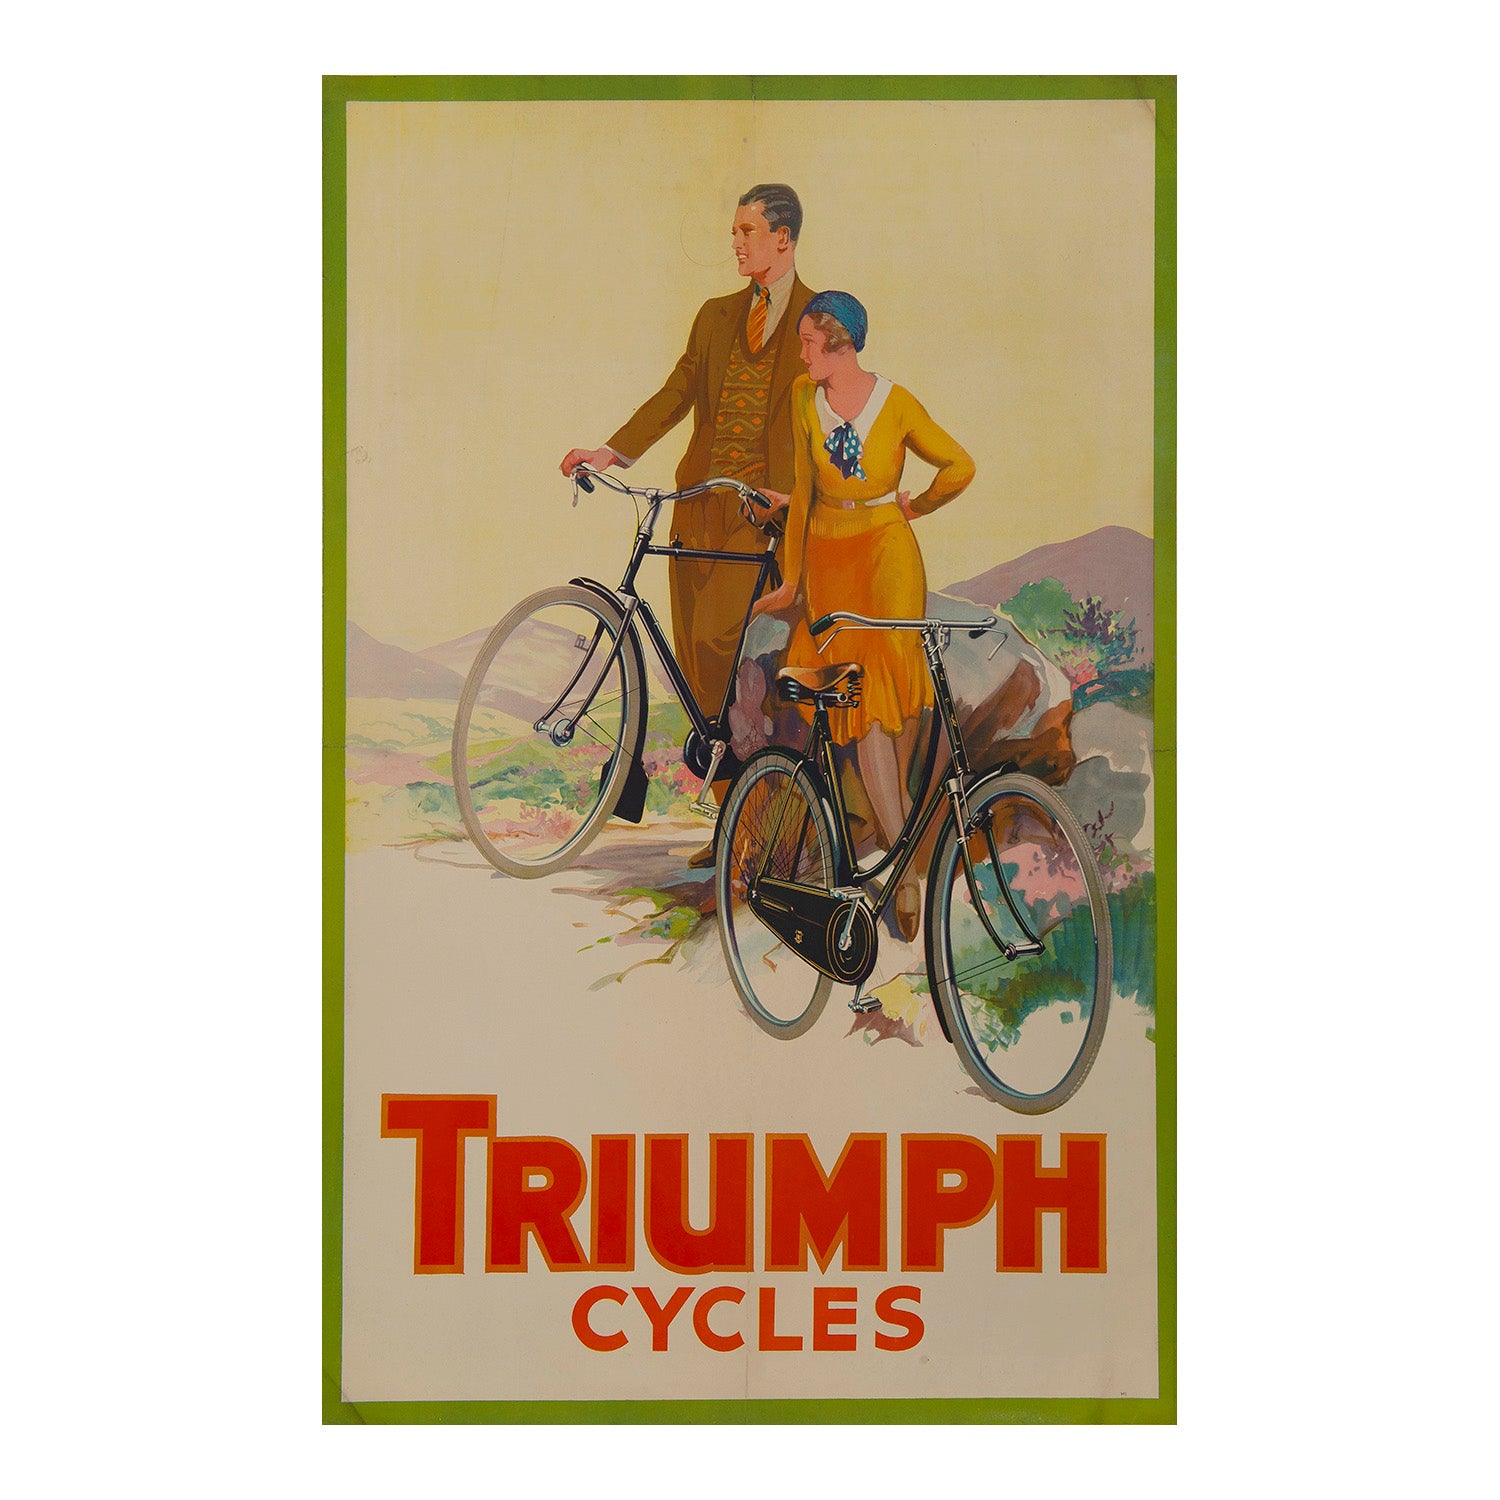 An original, promotional poster for the Triumph Cycle Company, c. 1930. The image depicts a man and woman standing with their bikes against a scenic backdrop.